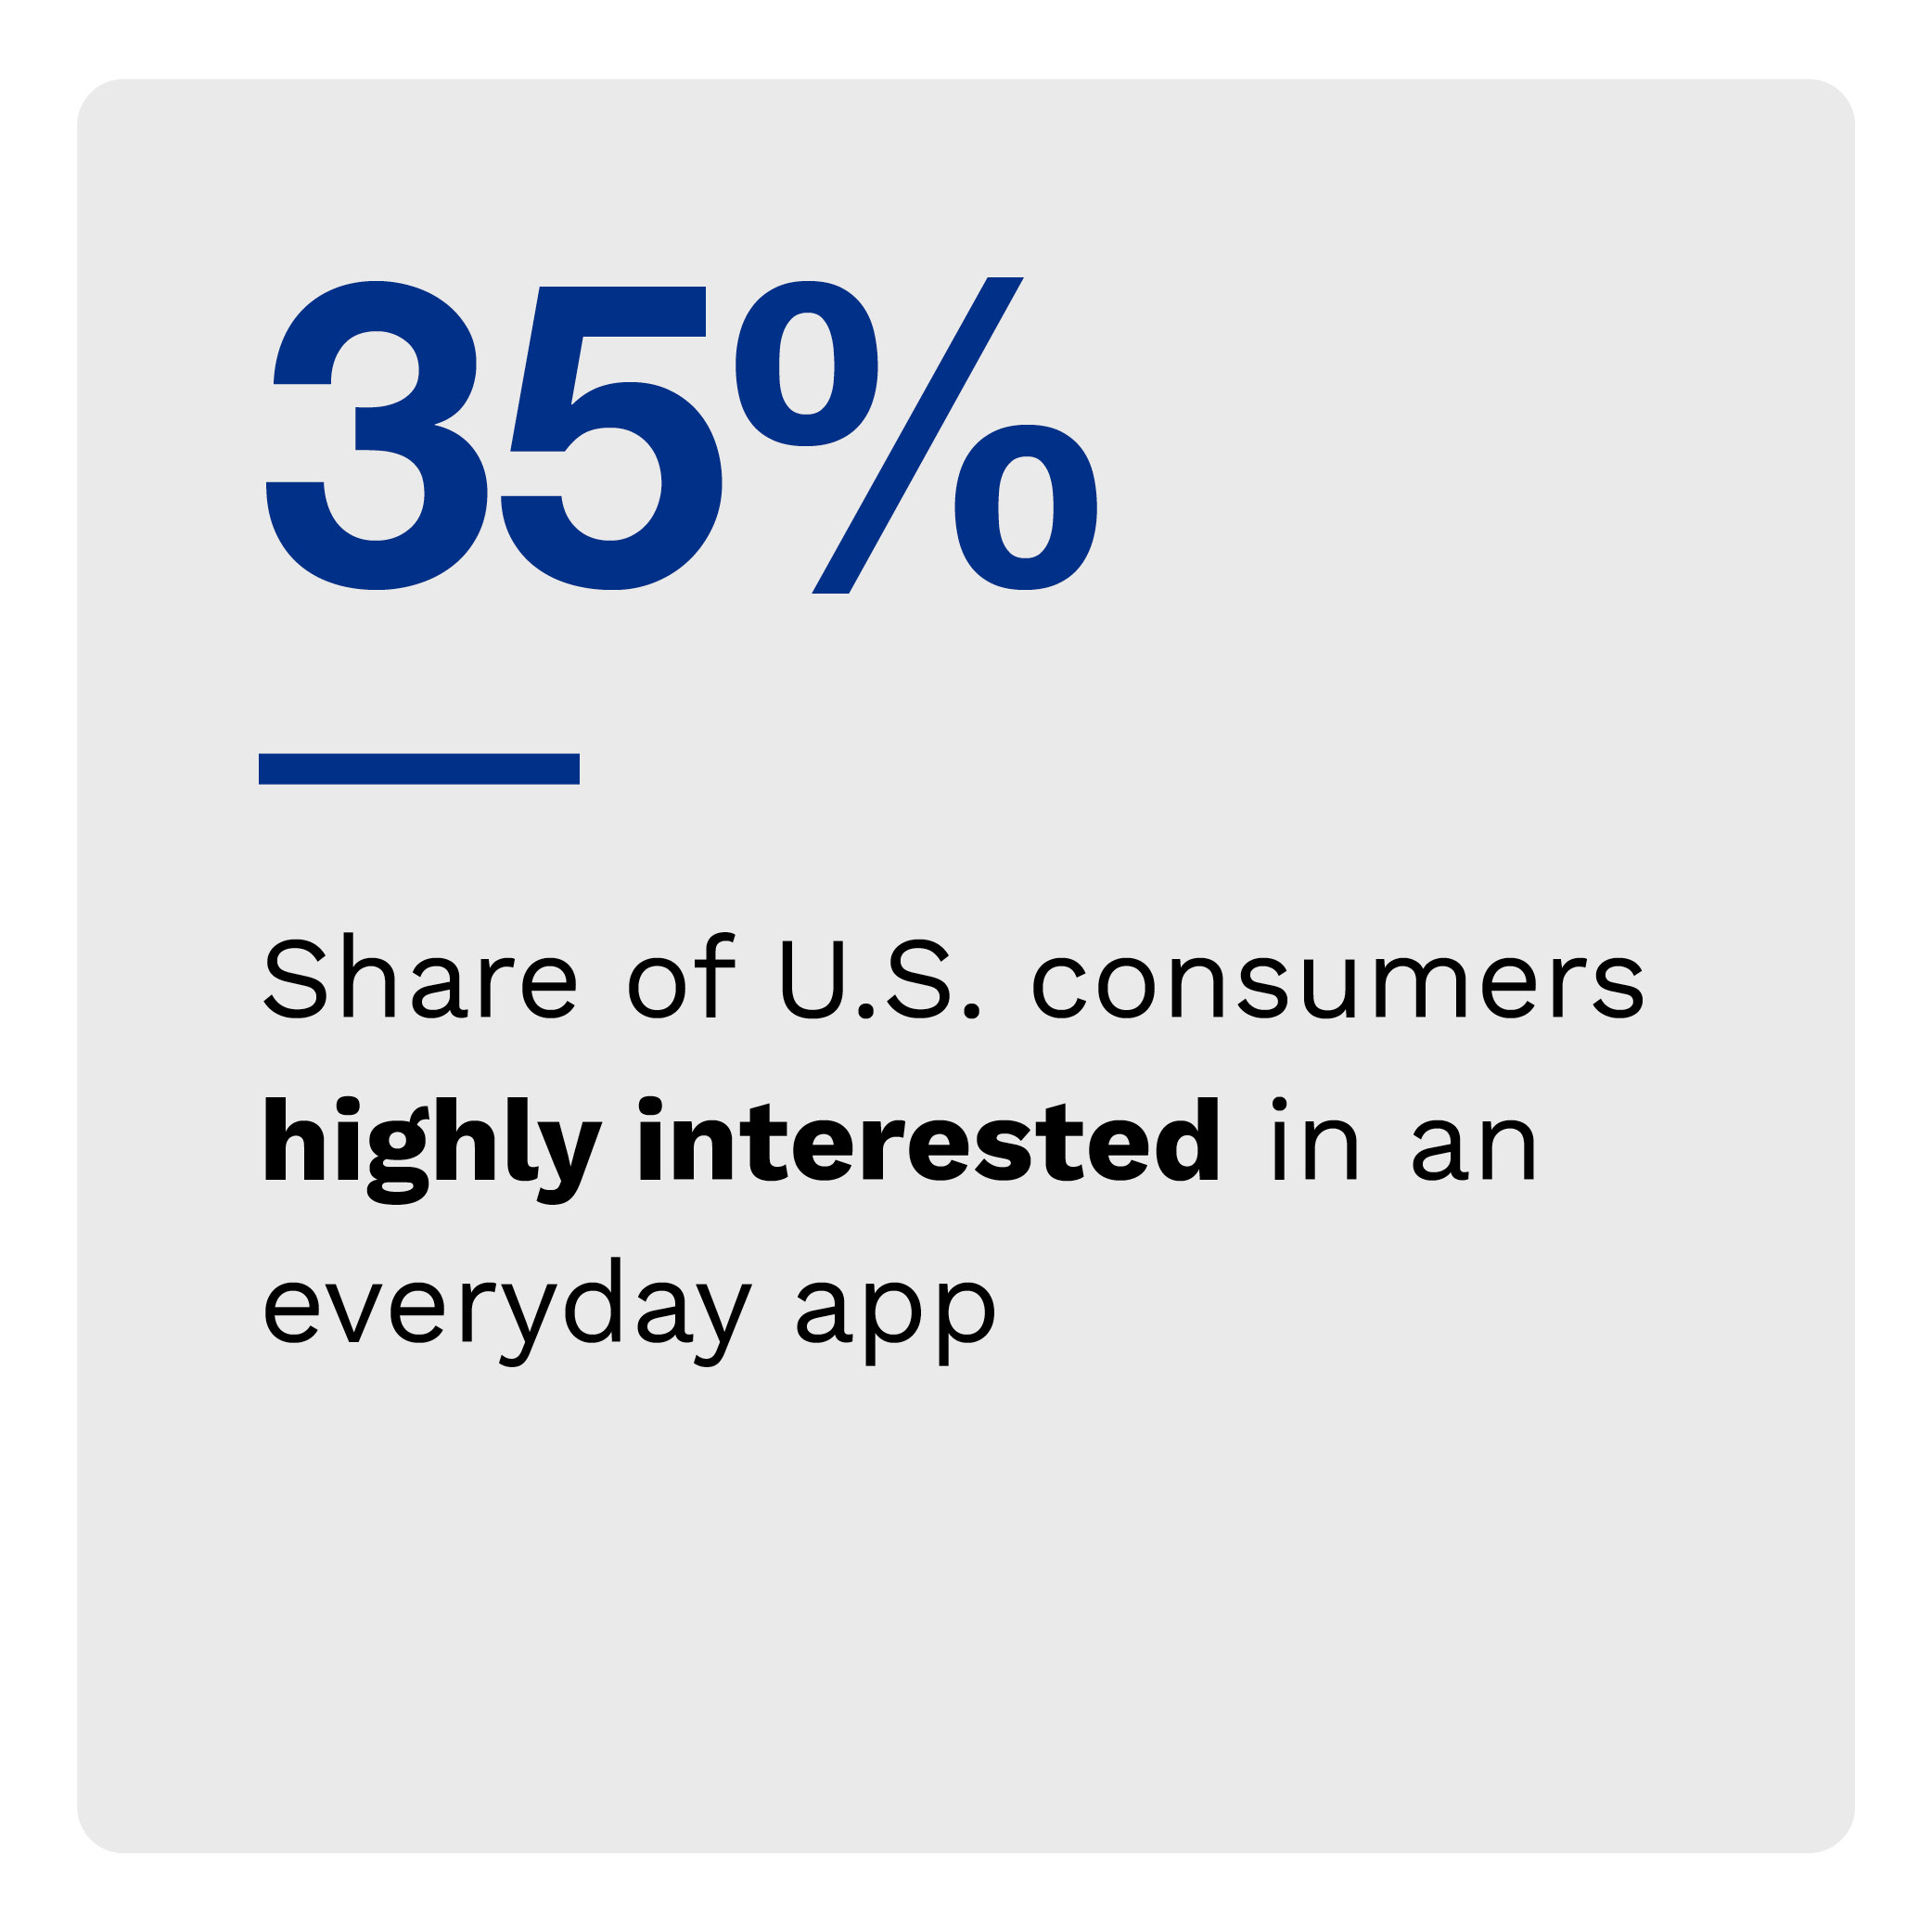 35%: Share of U.S. consumers highly interested in an everyday app